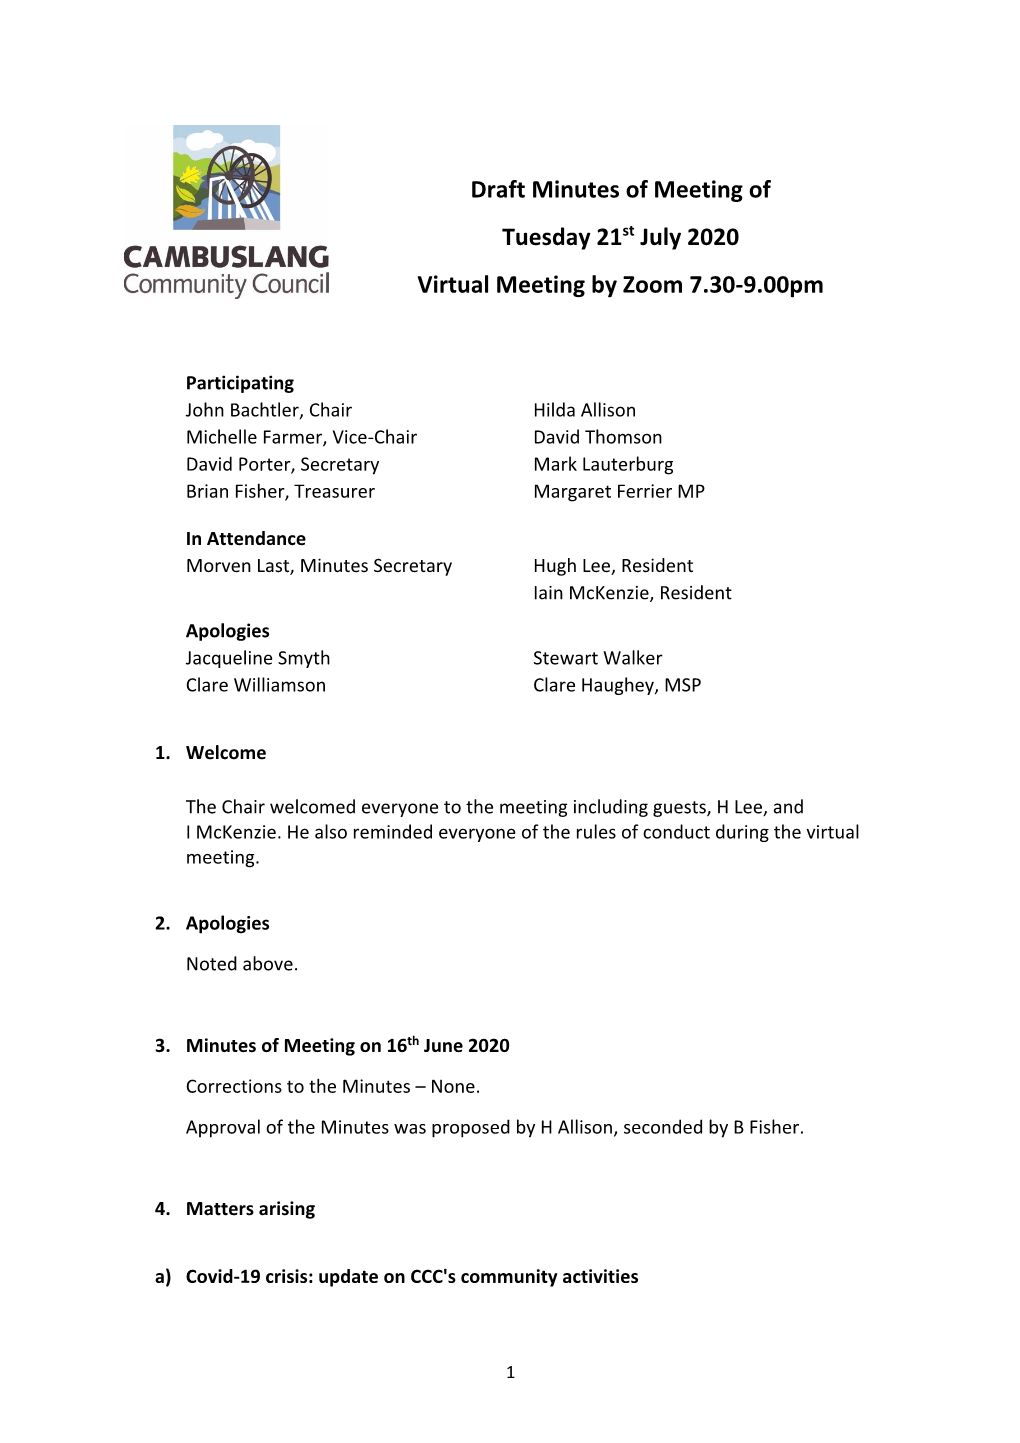 Draft Minutes of Meeting of Tuesday 21St July 2020 Virtual Meeting by Zoom 7.30-9.00Pm